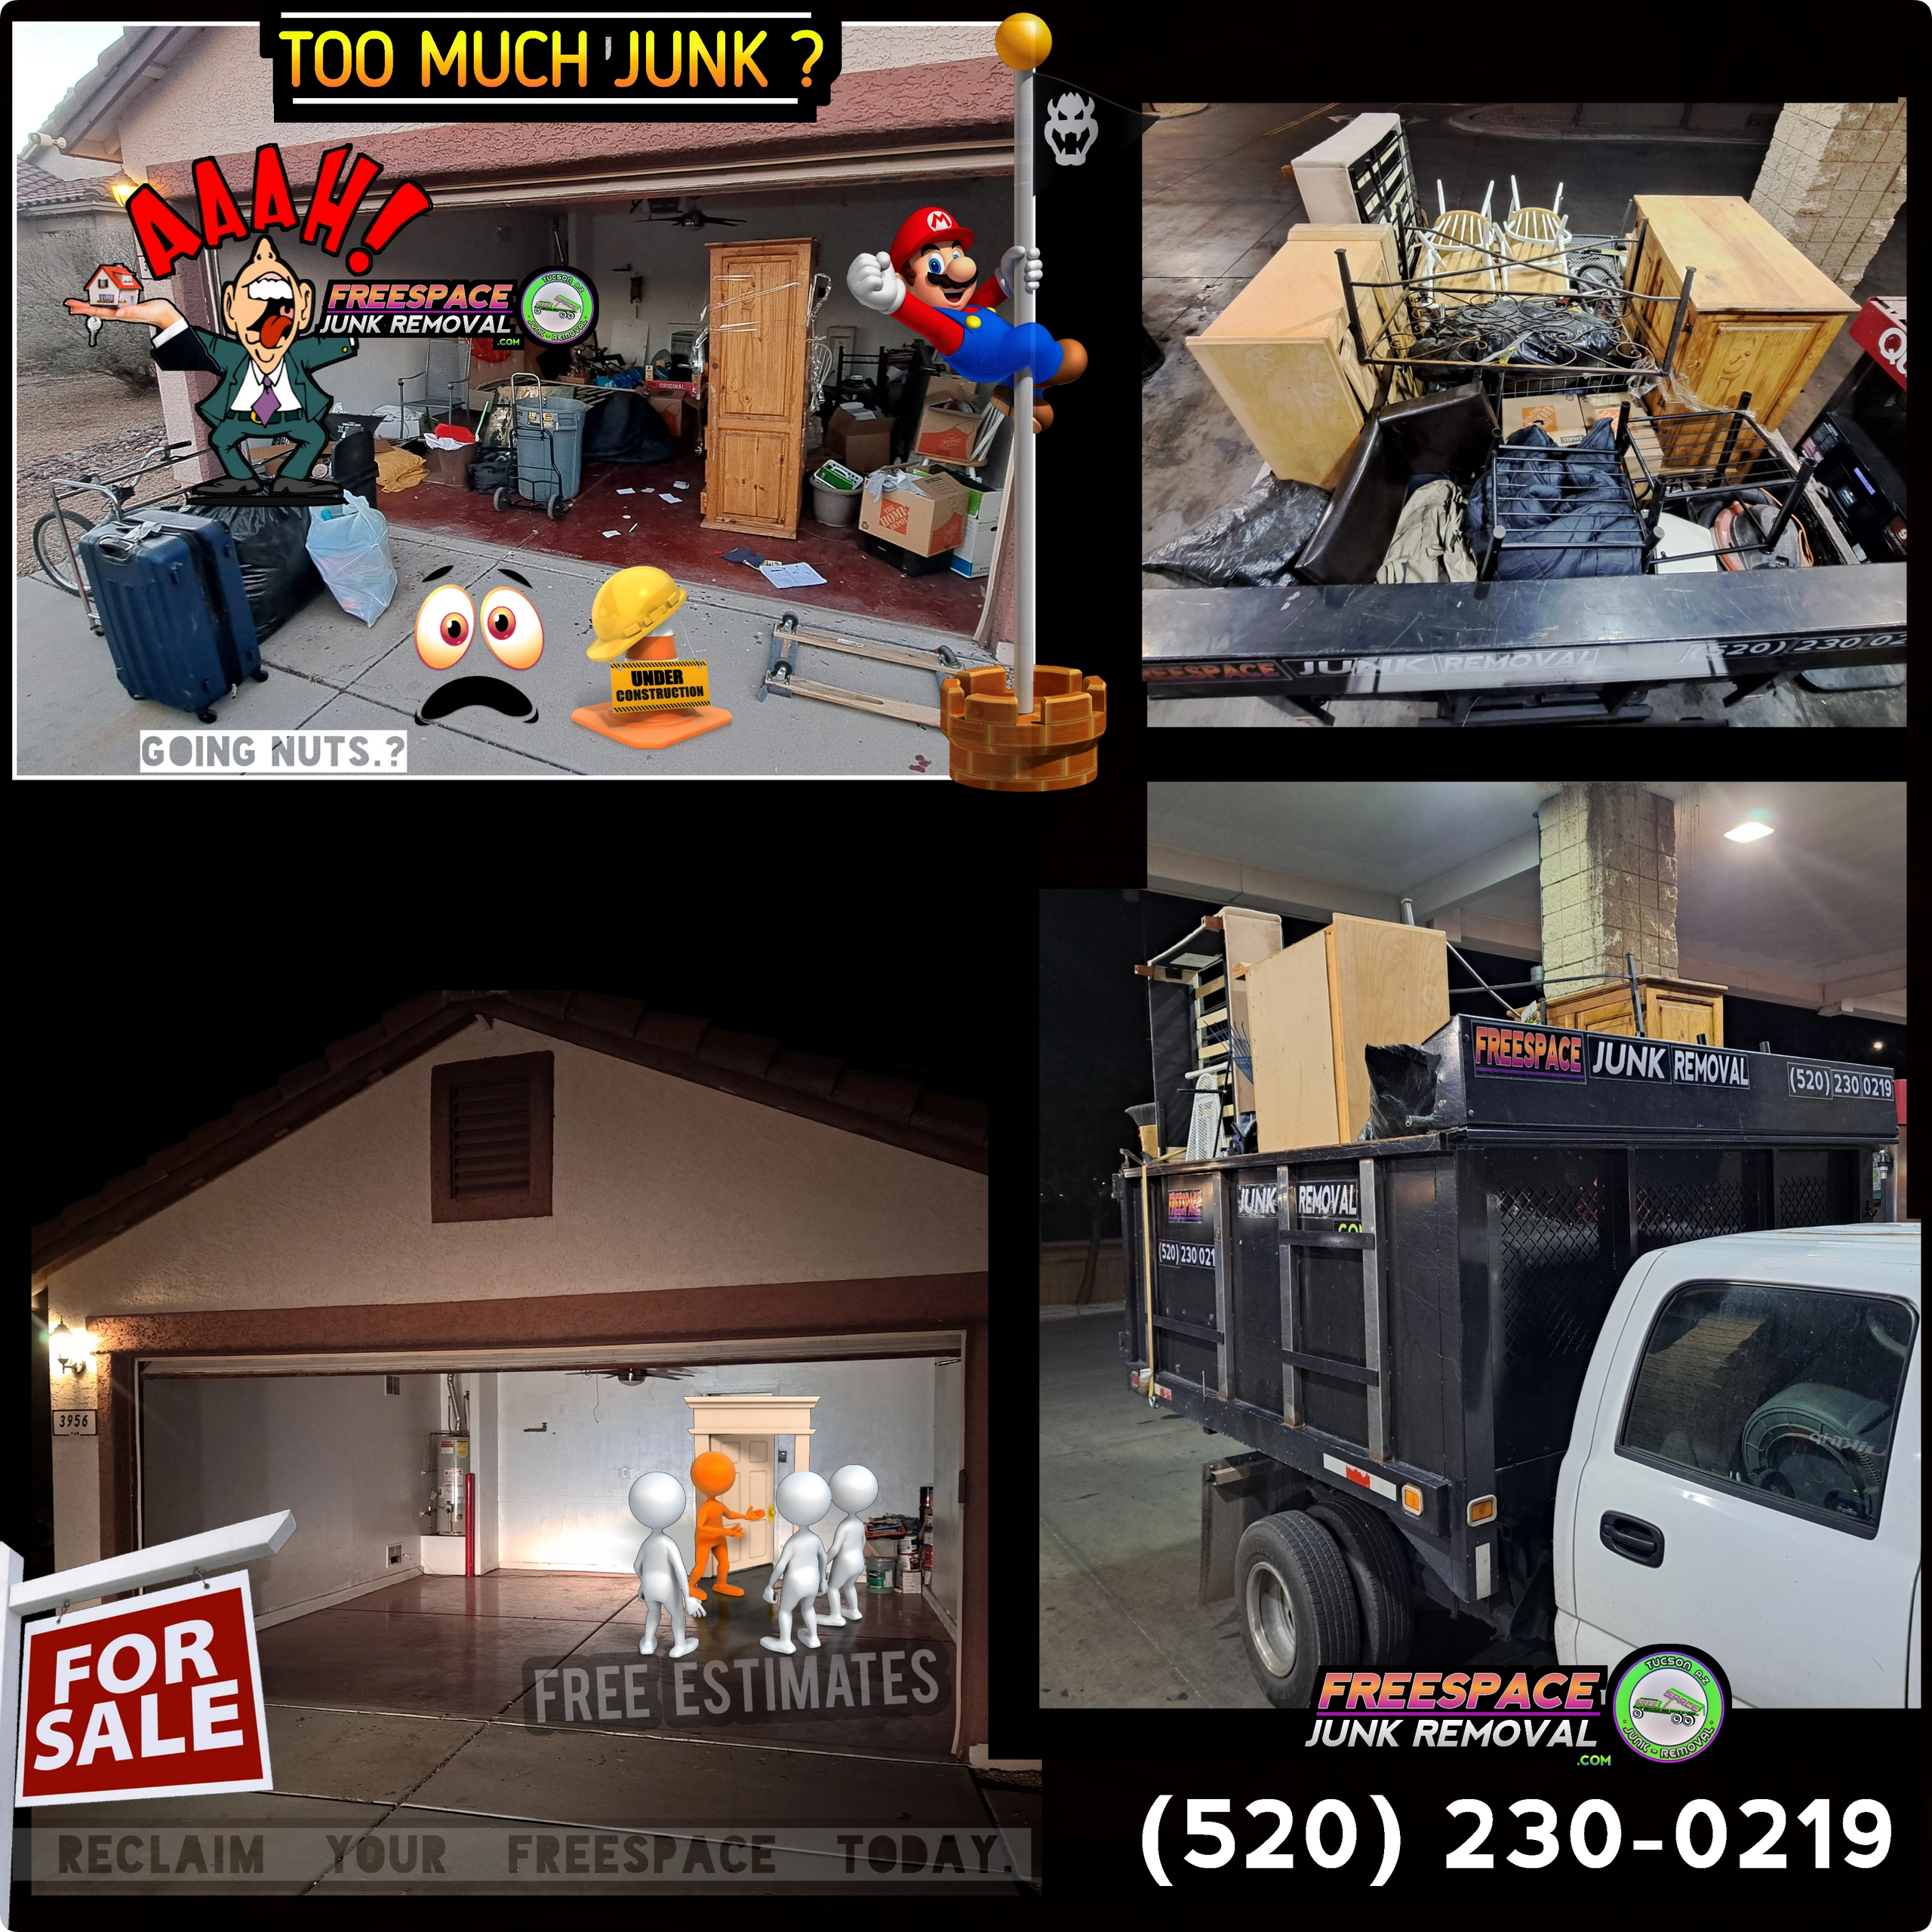 Before & after of full garage clean out junk removal in 85745 tucson az area for realtor.